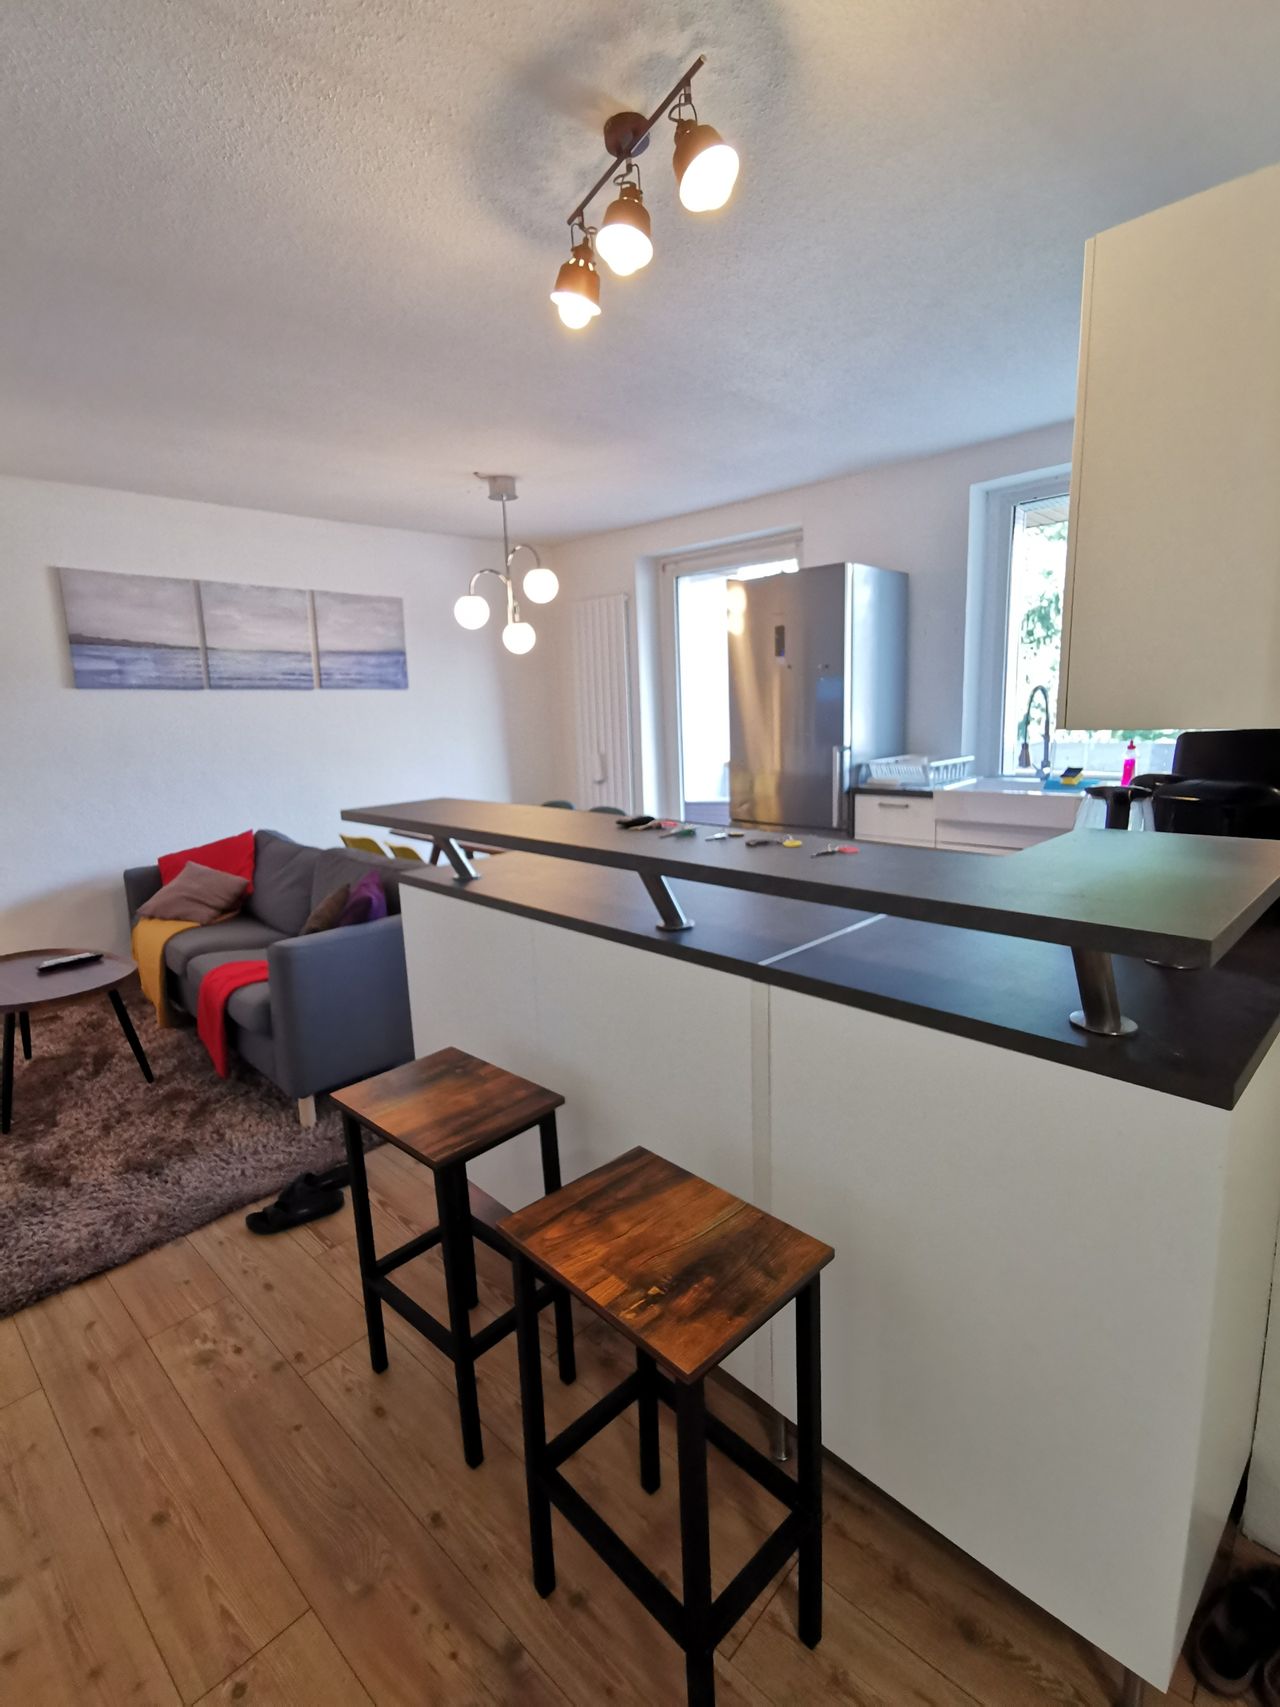 4-room newly and fully furnished apartment near Central Station with large balcony, 90-square meter in Wuppertal City Center